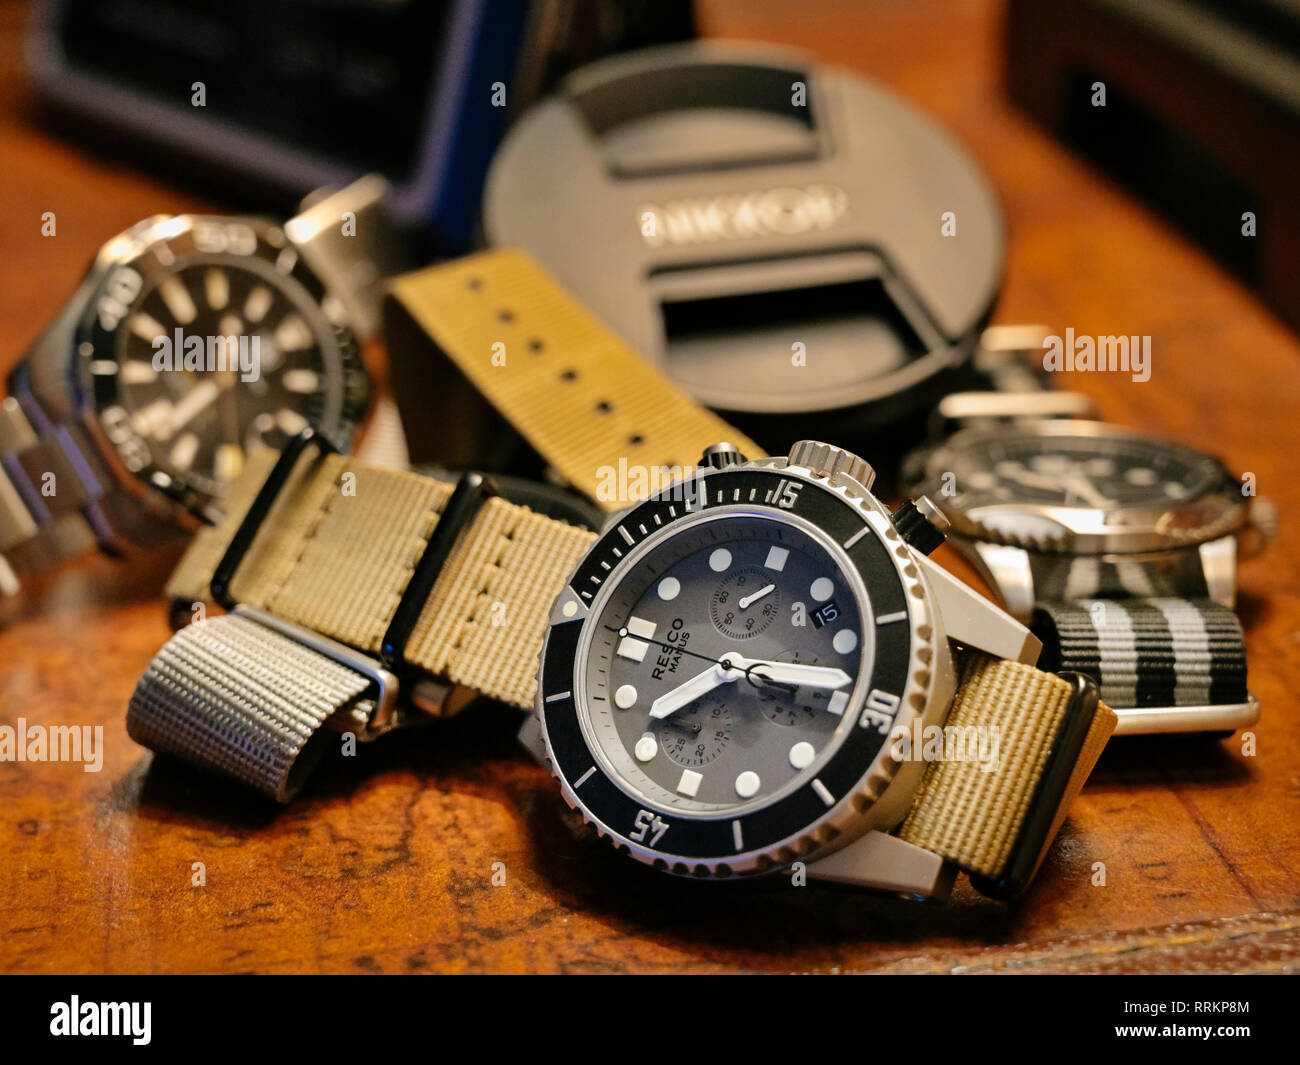 Group of men's luxury diver style wristwatches or timepieces on a dark wood background. Stock Photo